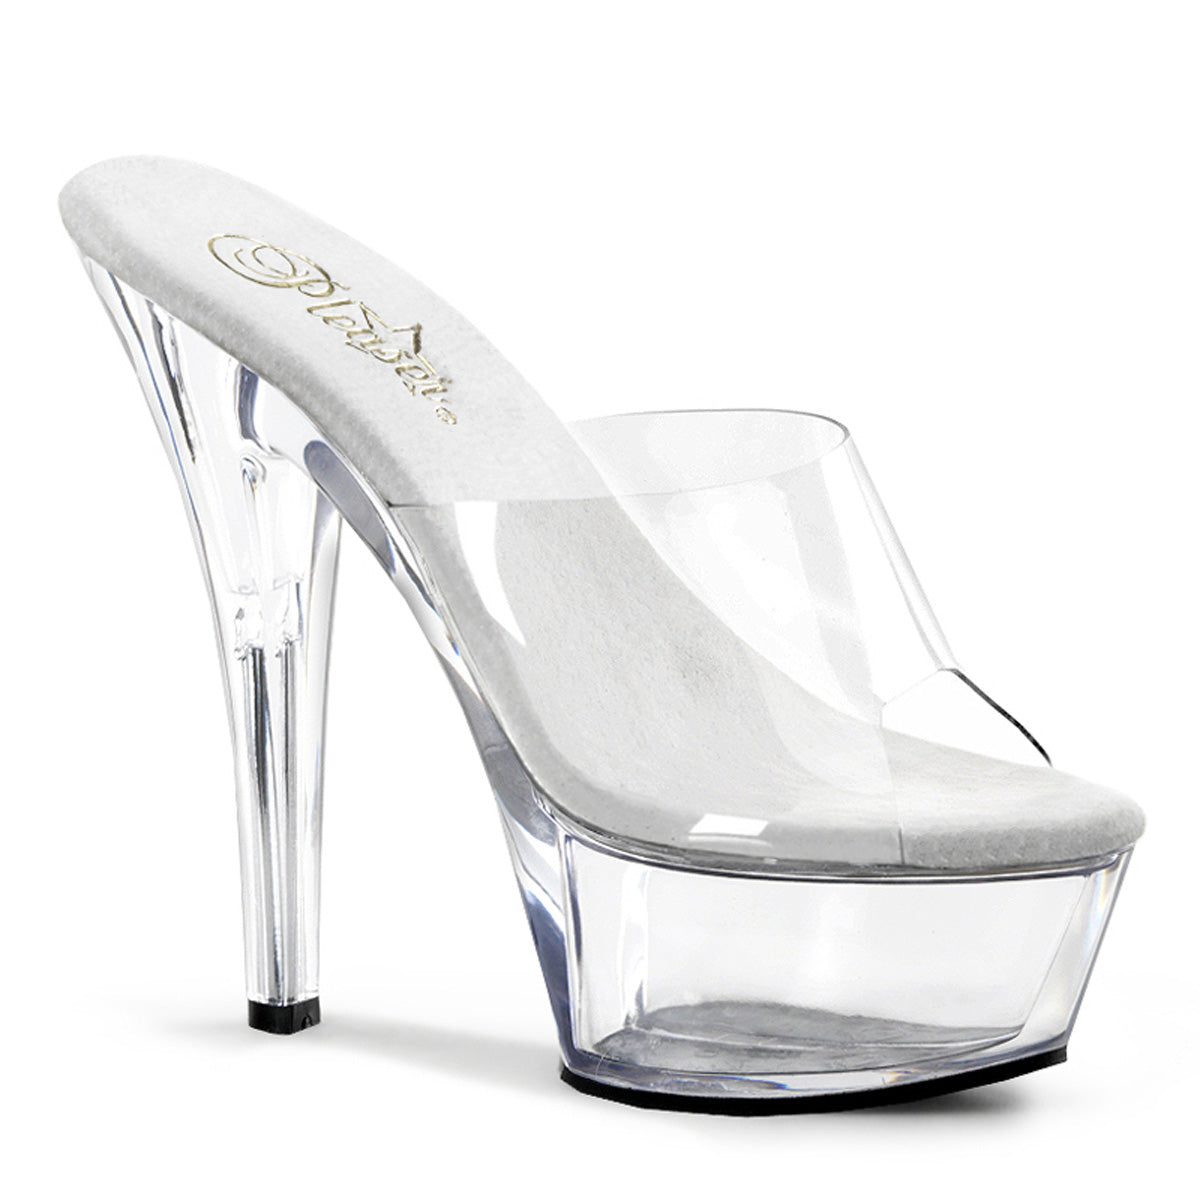 KISS-201 Pleaser 6 Inch Heel Clear Pole Dancing Platforms-Pleaser- Sexy Shoes